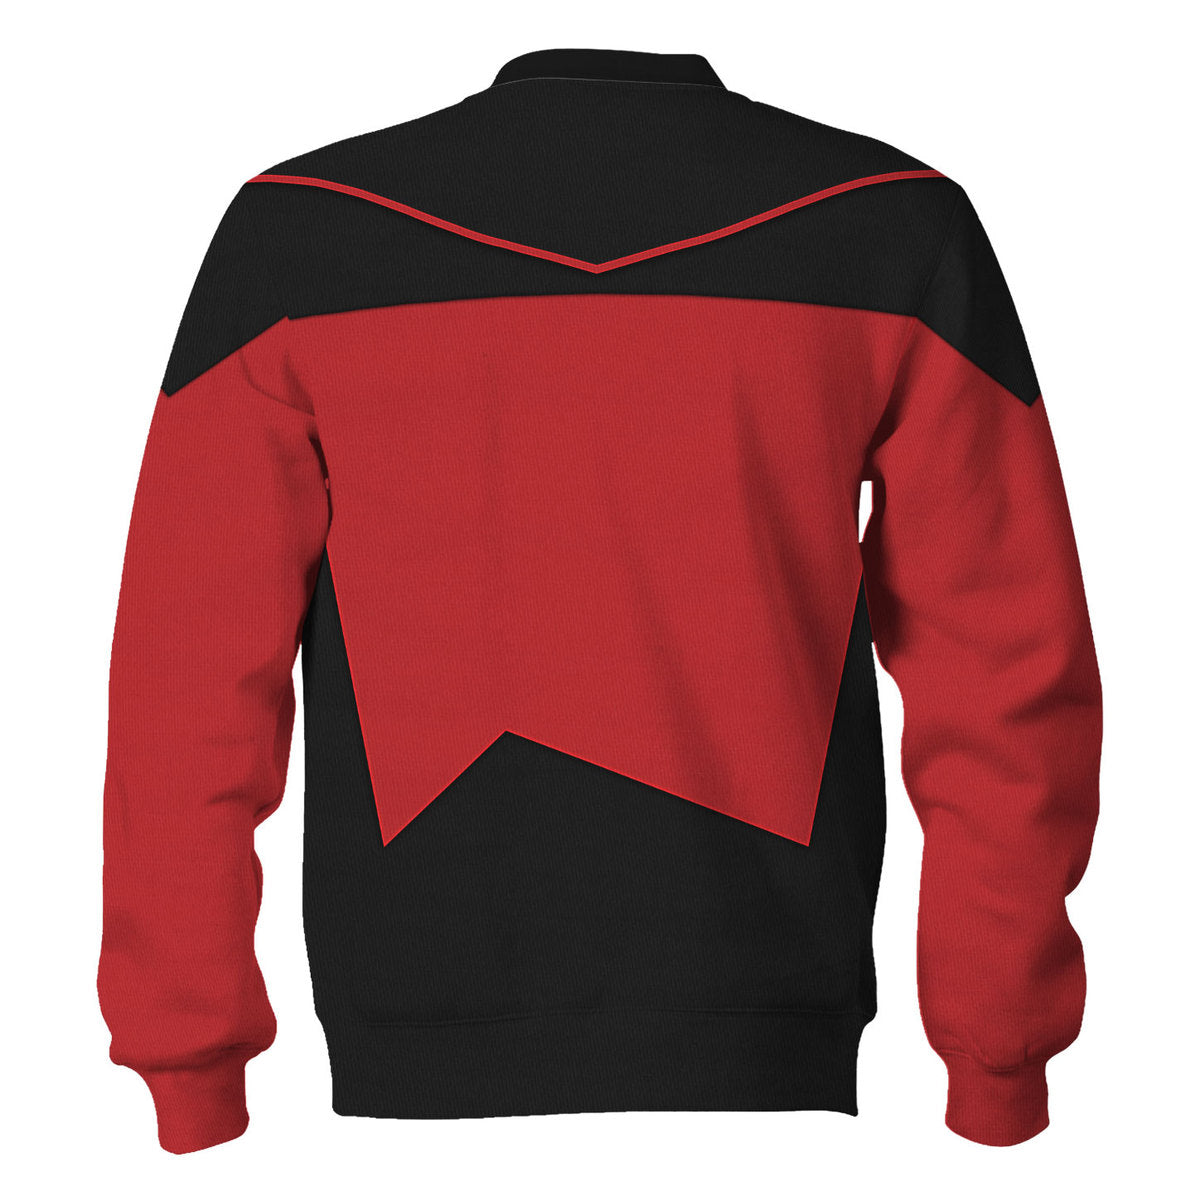 Star Trek Picard The Next Generation Red Costume Cool - Sweater - Ugly Christmas Sweater